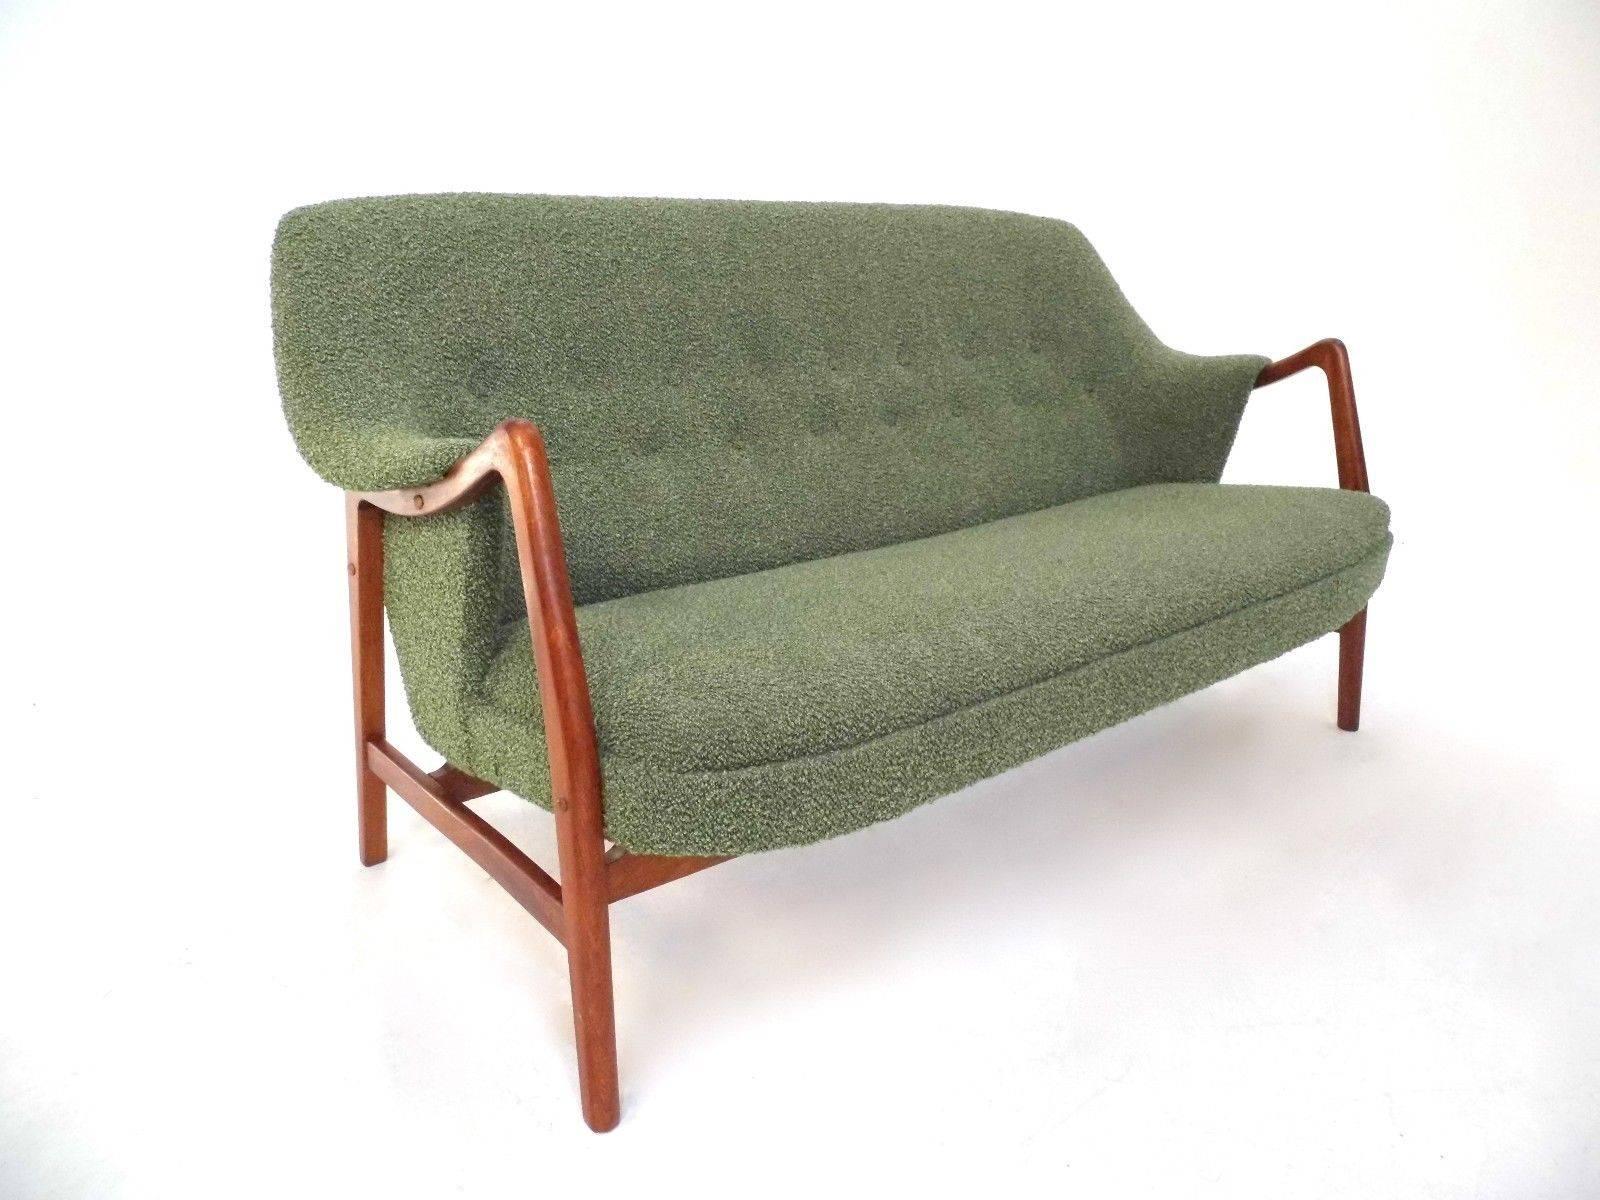 A beautiful Danish 'Rio' green wool and teak three-seat sofa by Dokka Mobler, this would make a stylish addition to any living or work area. The sofa has a curved backrest and sculptured teak arms for enhanced comfort. A striking piece of